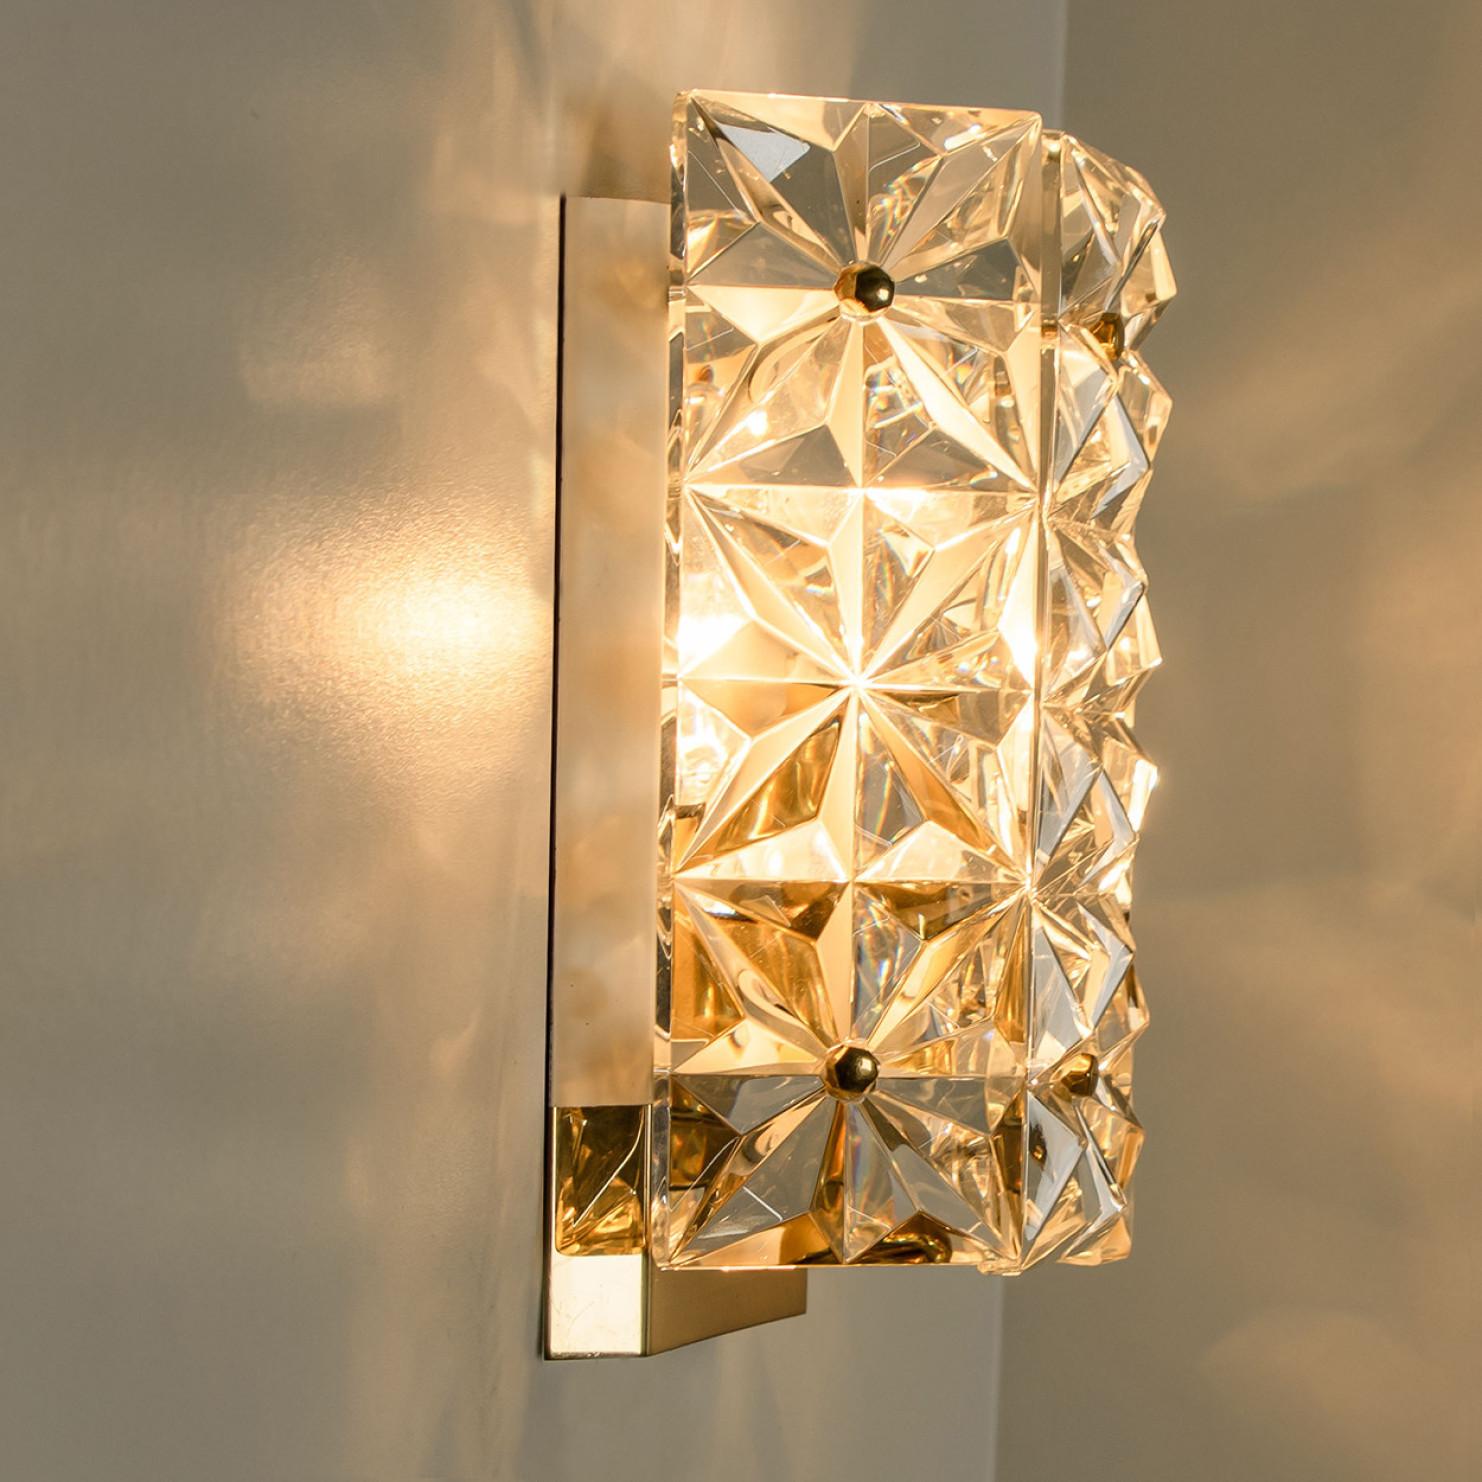 Late 20th Century Crystal Glass and Brass Wall Sconces by Kinkeldey, 1970s For Sale